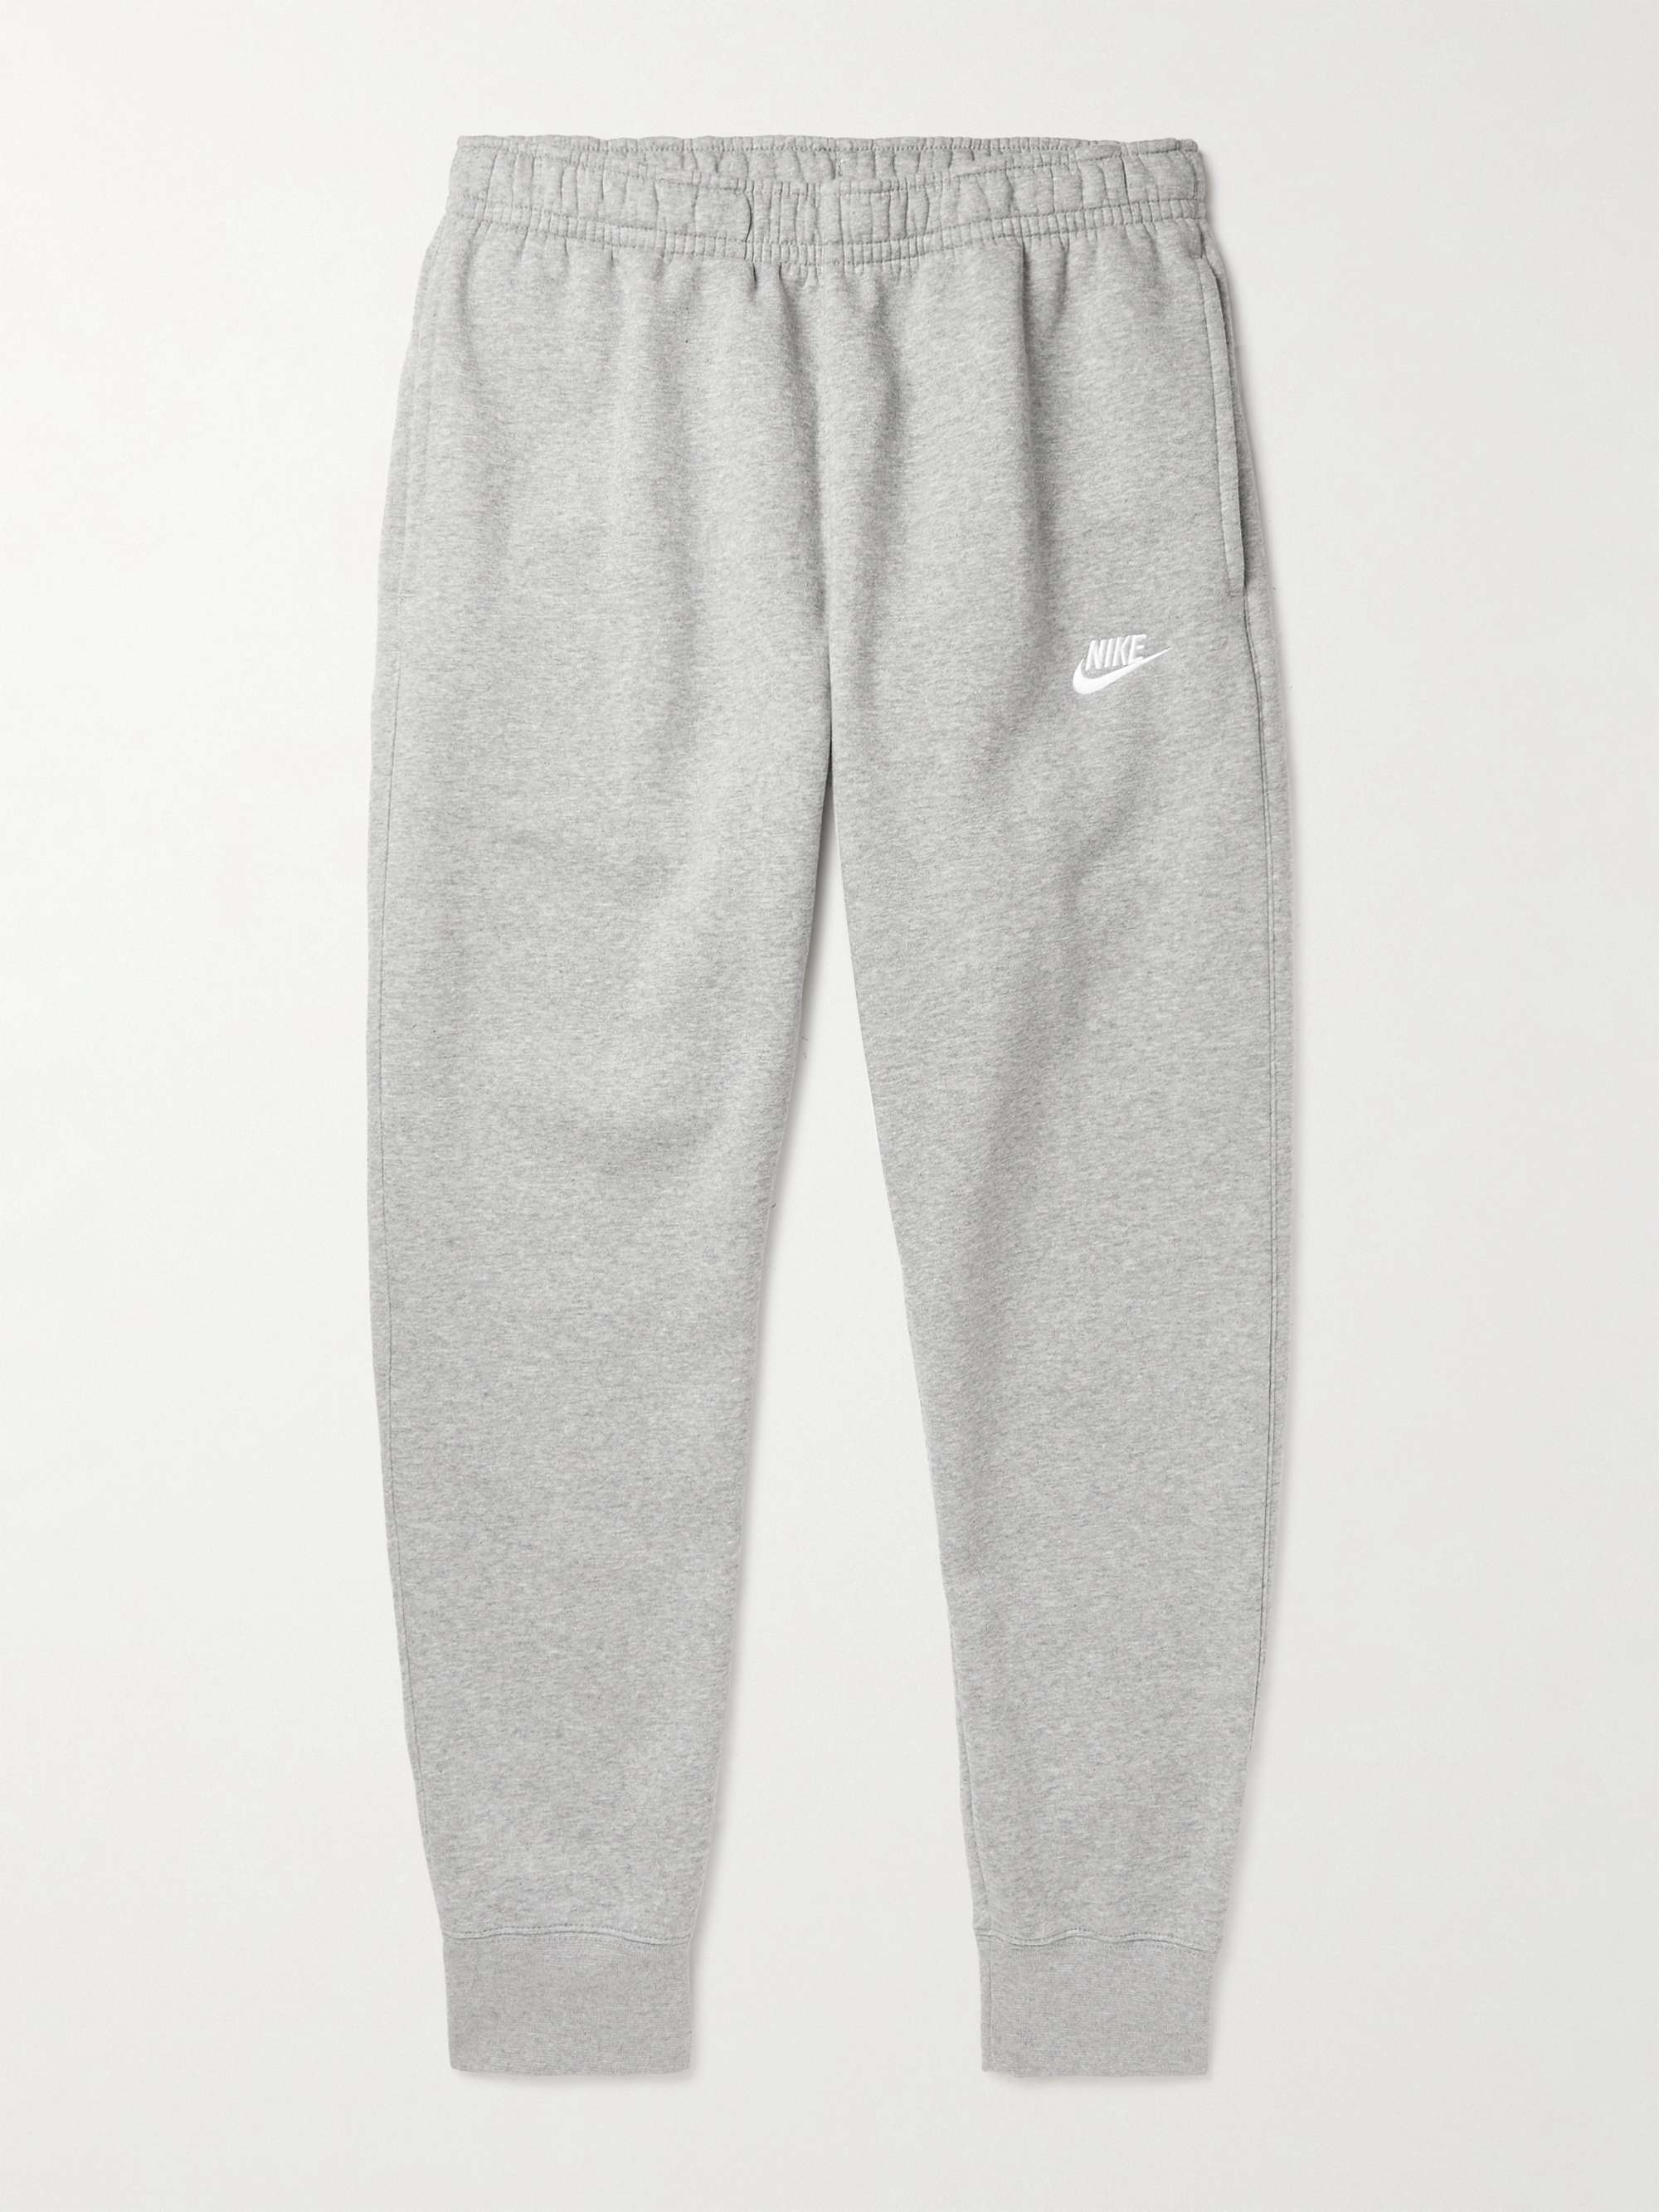 Gray NSW Tapered Cotton-Blend Jersey Sweatpants | NIKE | MR PORTER